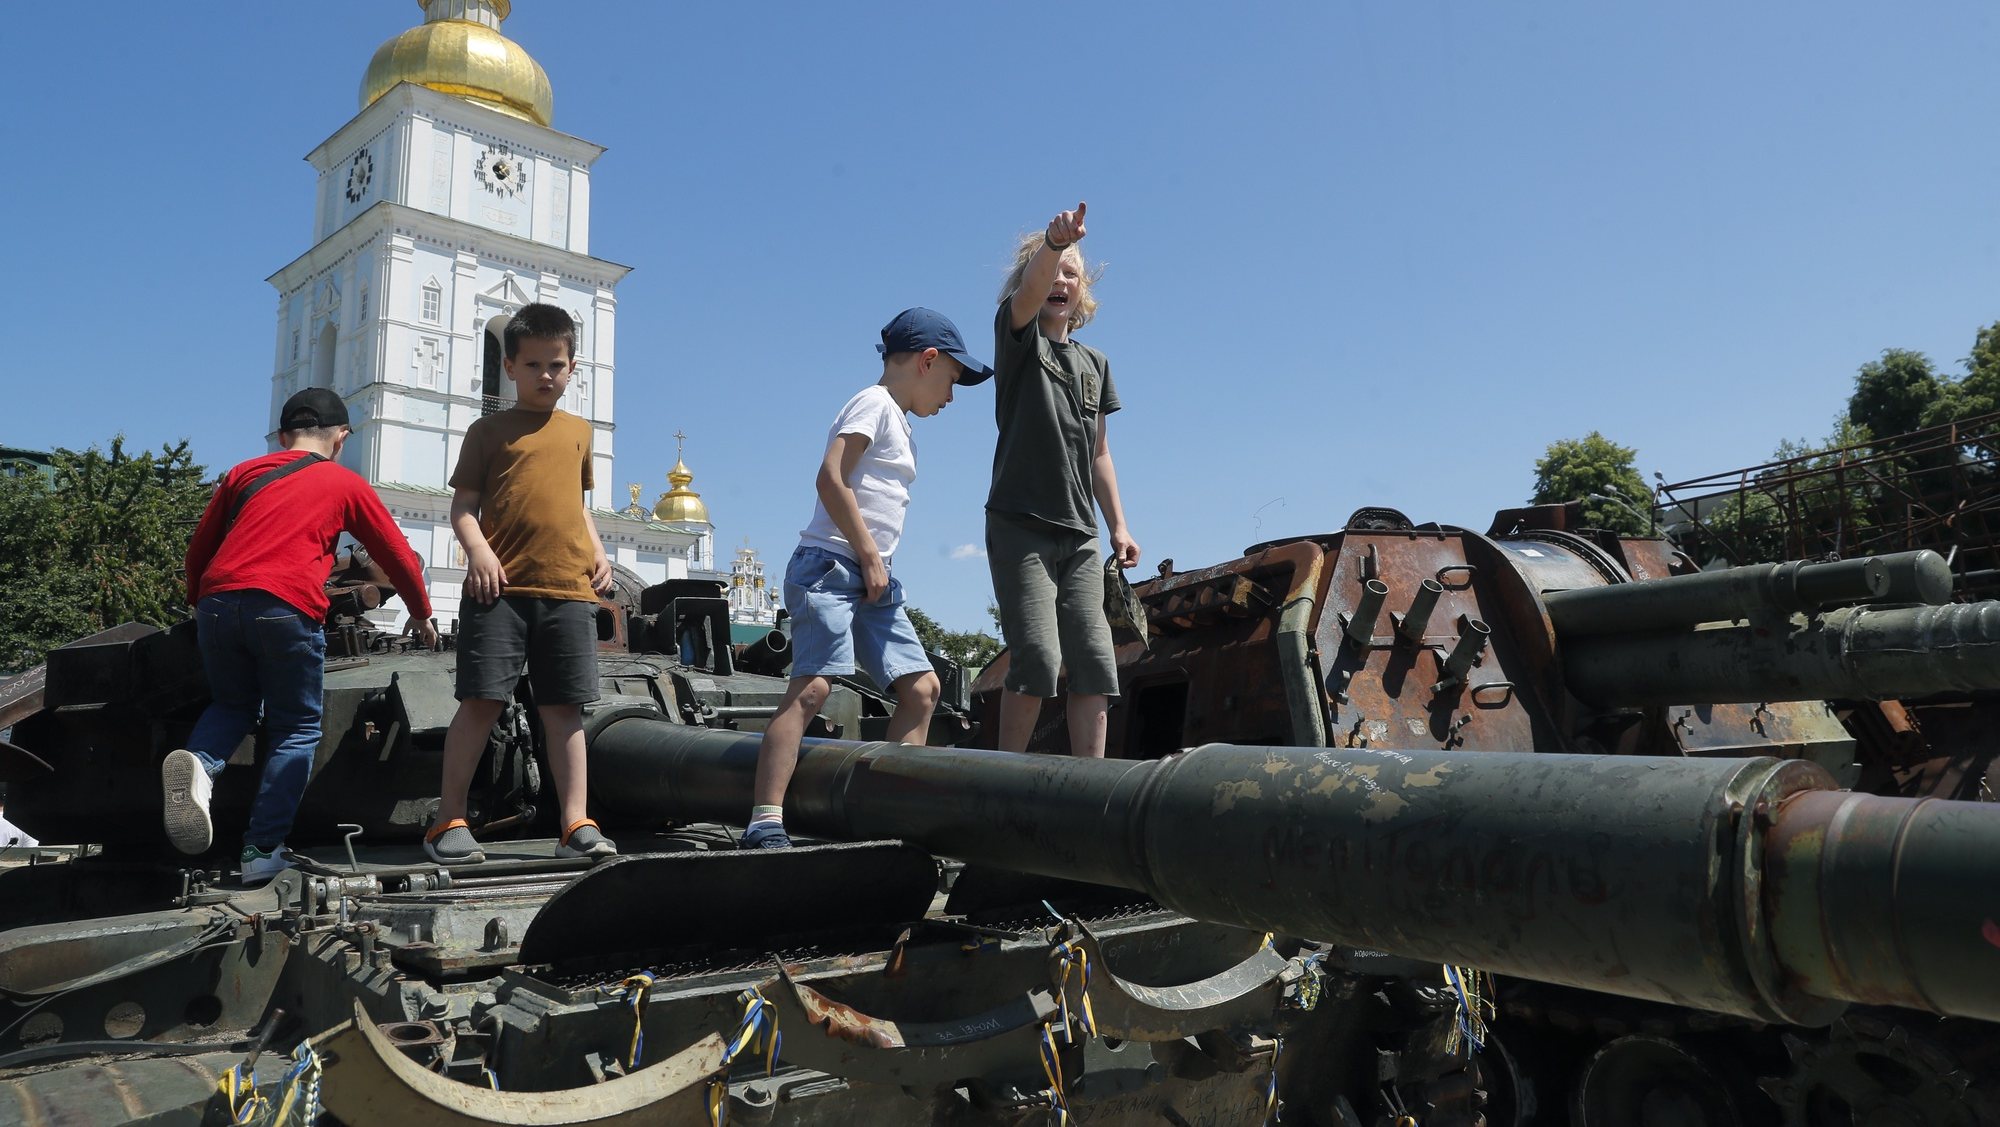 epa10672369 Children play on the damaged Russian military machinery displayed during an event to support children, near St. Mykhailivsky Cathedral in Kyiv, Ukraine, 04 June 2023 amid the Russian invasion. Ukrainians mark the &#039;Day of Remembrance of Children&#039; who died as a result of the armed aggression of Russia against Ukraine. At least 485 Ukrainian children were killed and more than one thousand were injured. In addition, almost 20,000 Ukrainian children were deported to the territory of the Russian Federation in the period from 24 February 2022, according to Kyiv City Military Administration. The event was founded by the Resolution of the Verkhovna Rada of Ukraine (Parliament) in 2021, coinciding with the UN’s International Day of Innocent Children Victims of Aggression, annually on June 04.  EPA/SERGEY DOLZHENKO